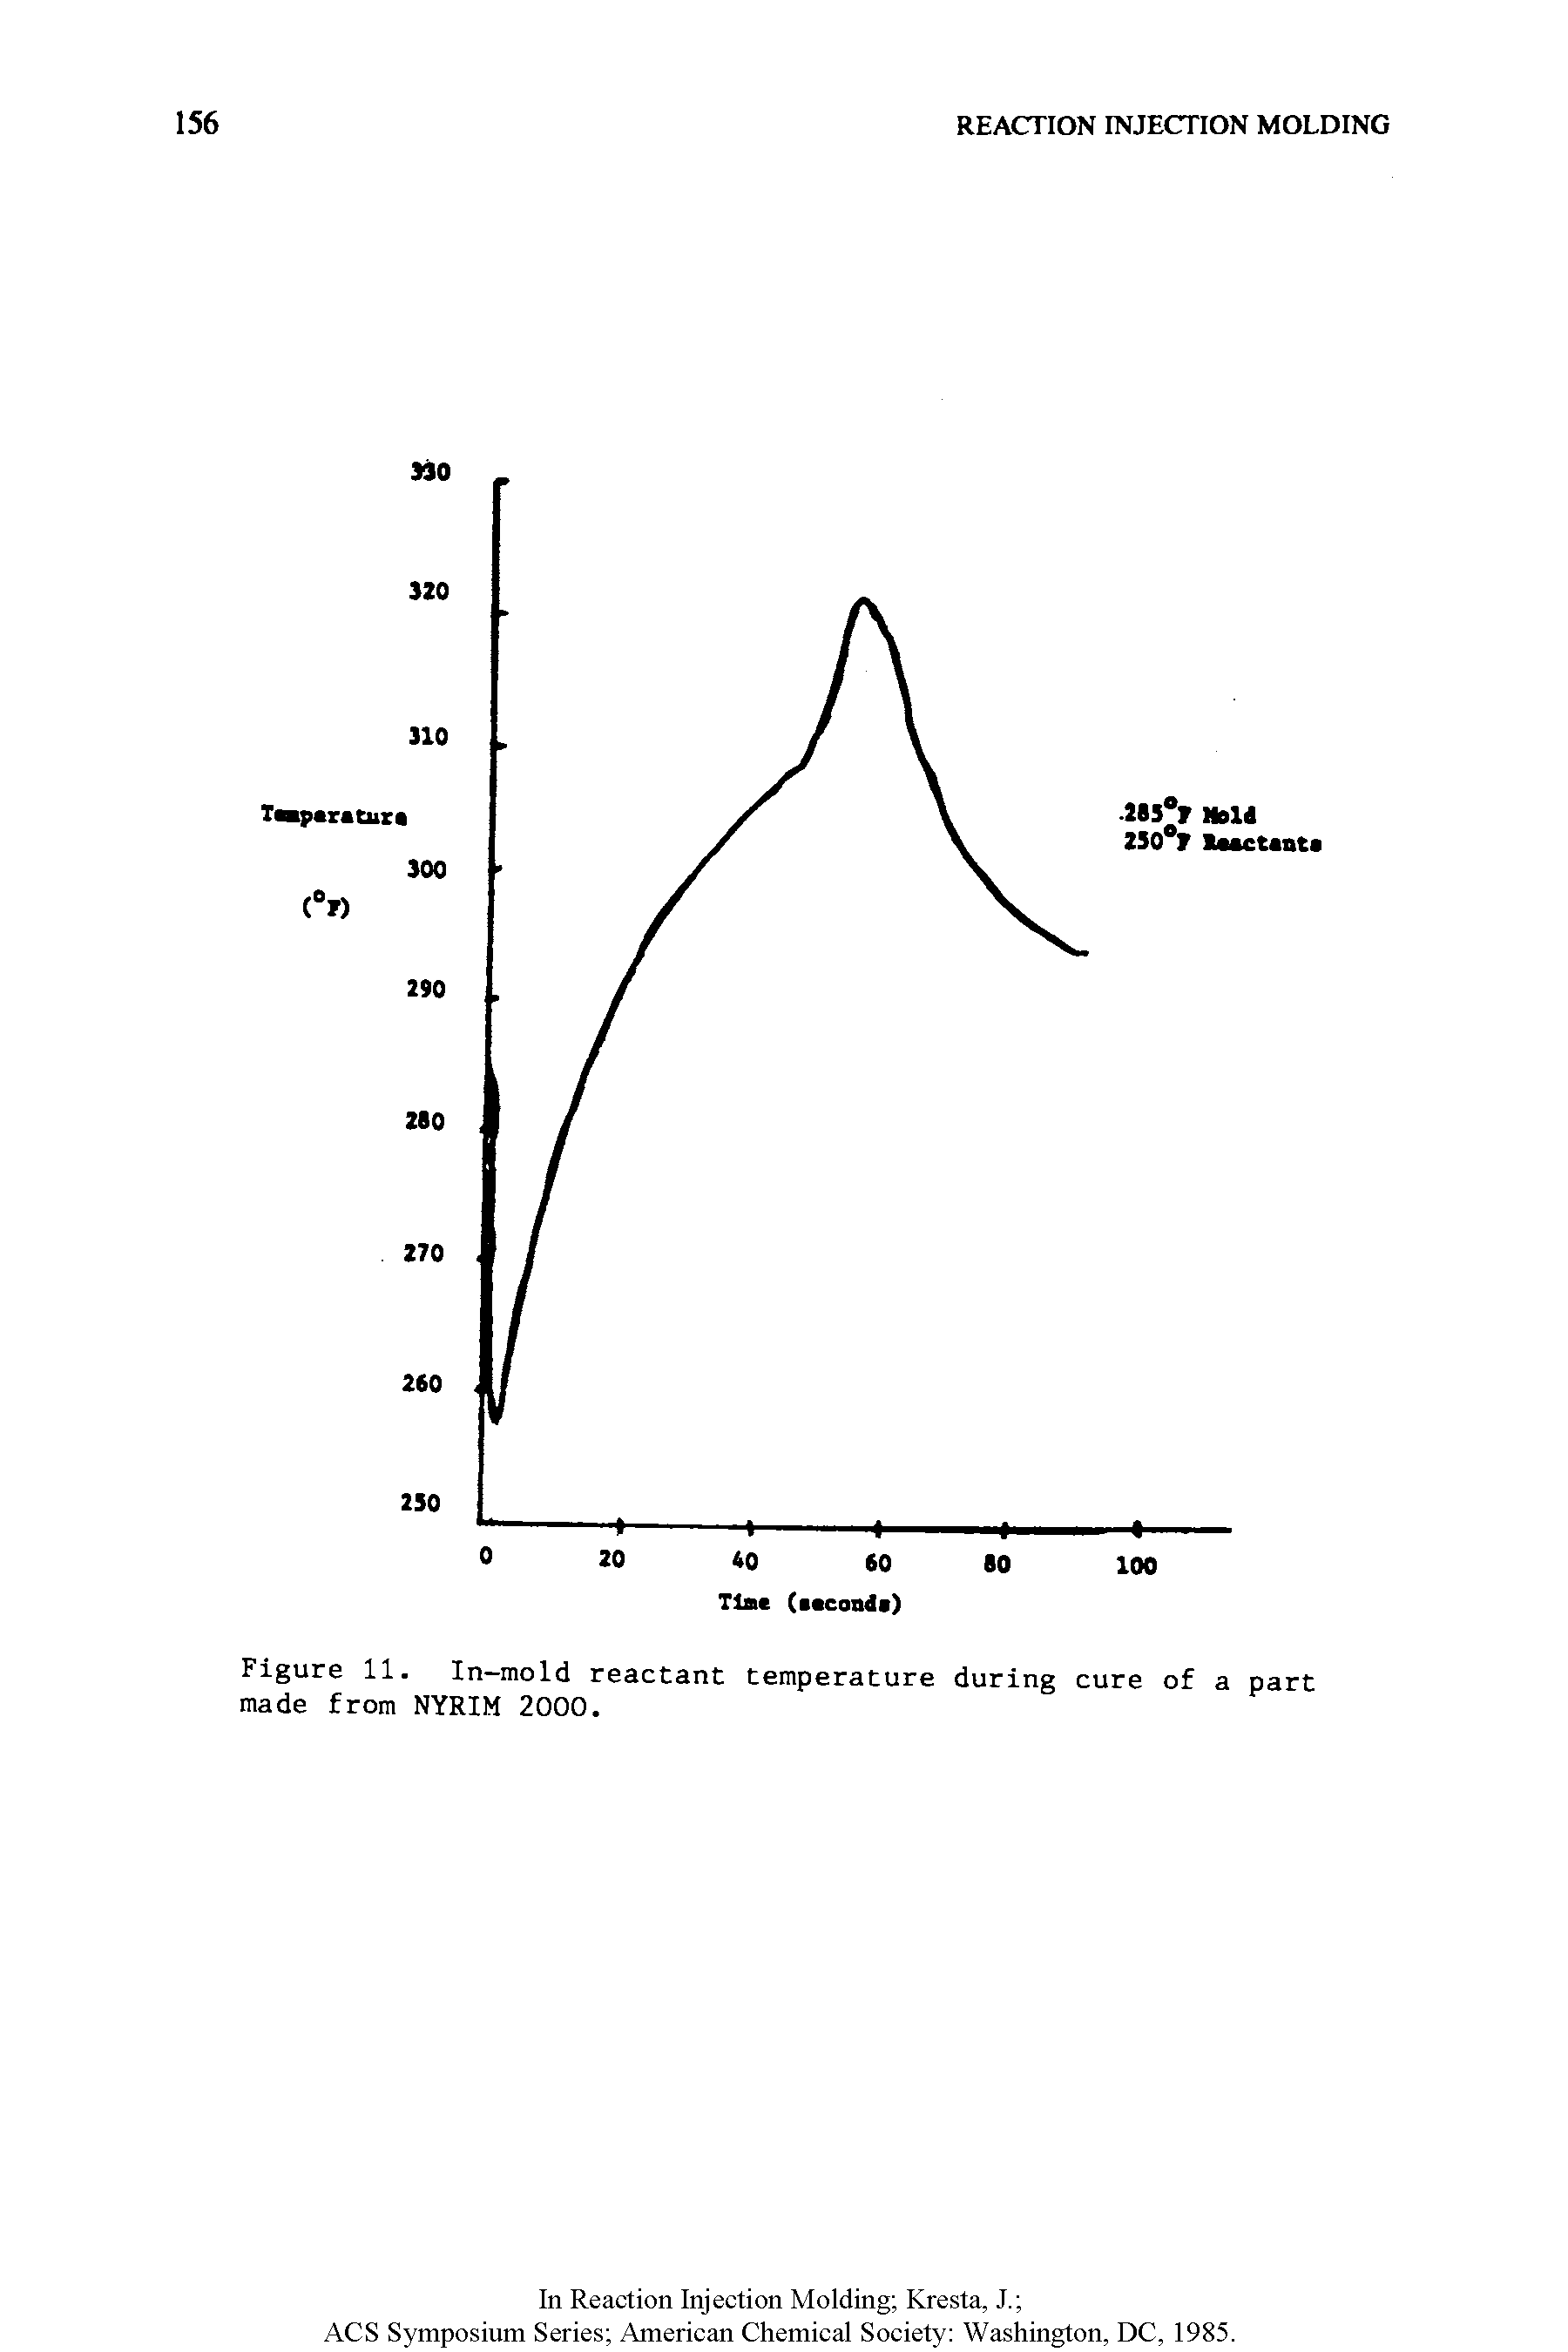 Figure 11. In-mold reactant temperature during cure of a part made from NYRIM 2000.